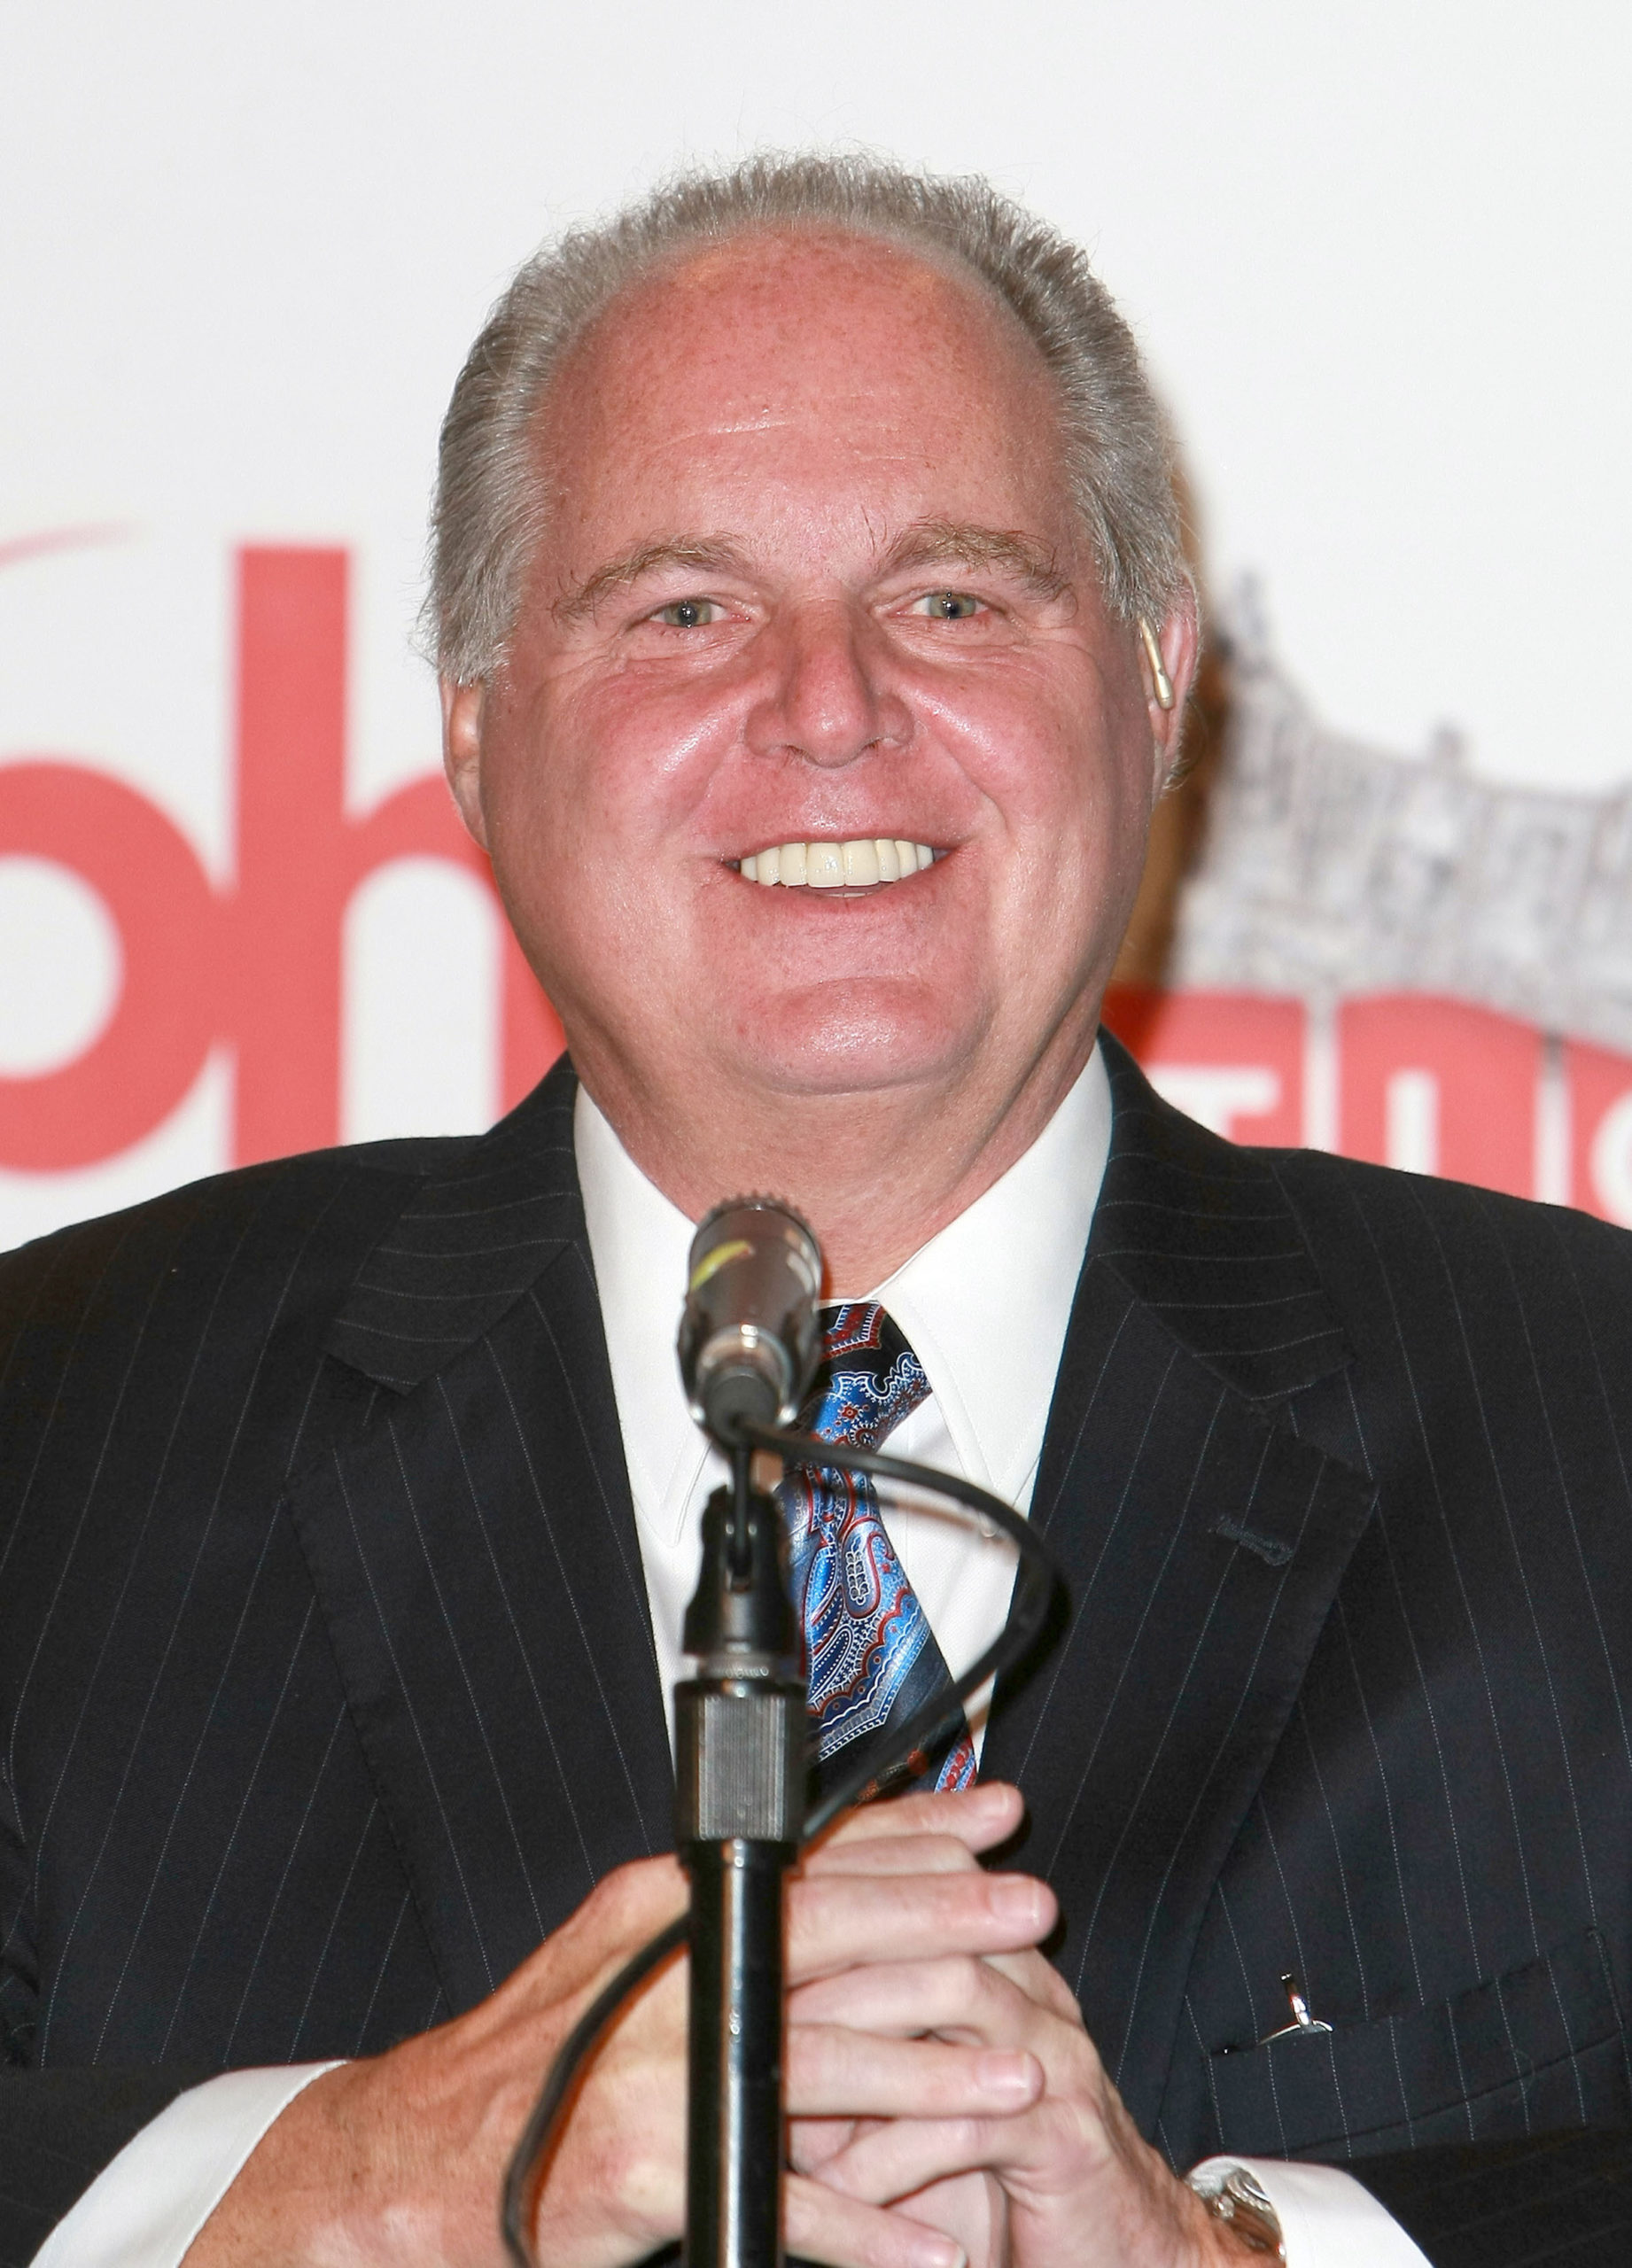 Rush Limbaugh Died At 70 From Lung Cancer